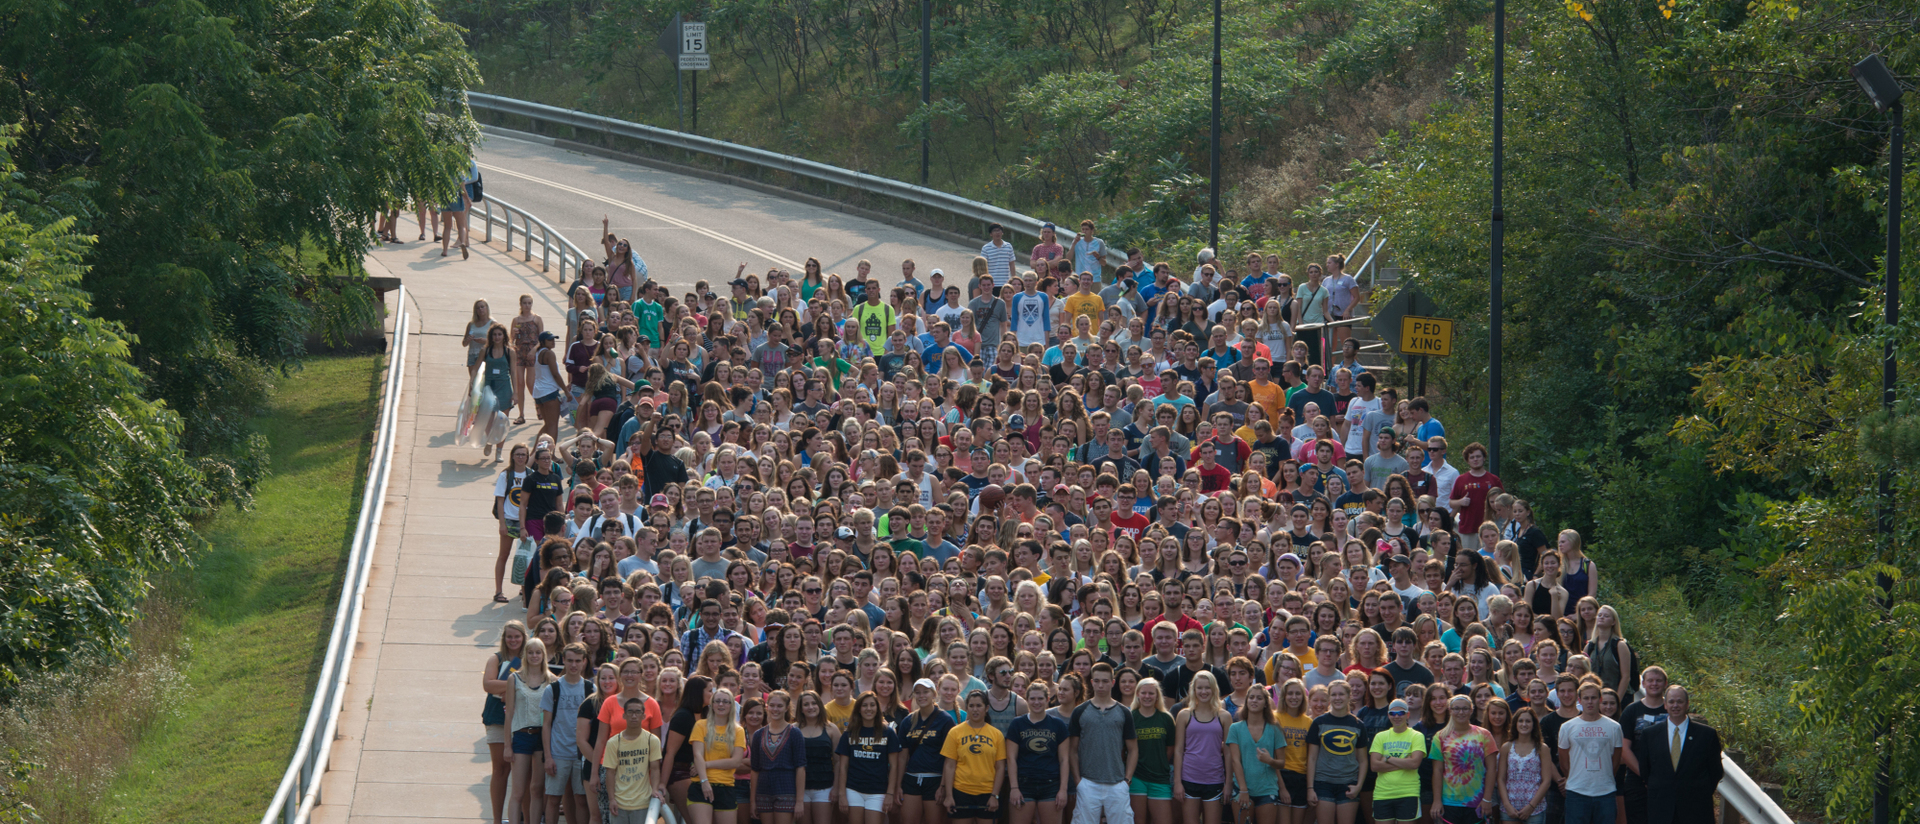 The incoming freshmen class of 2016 fills the UW-Eau Claire hill.